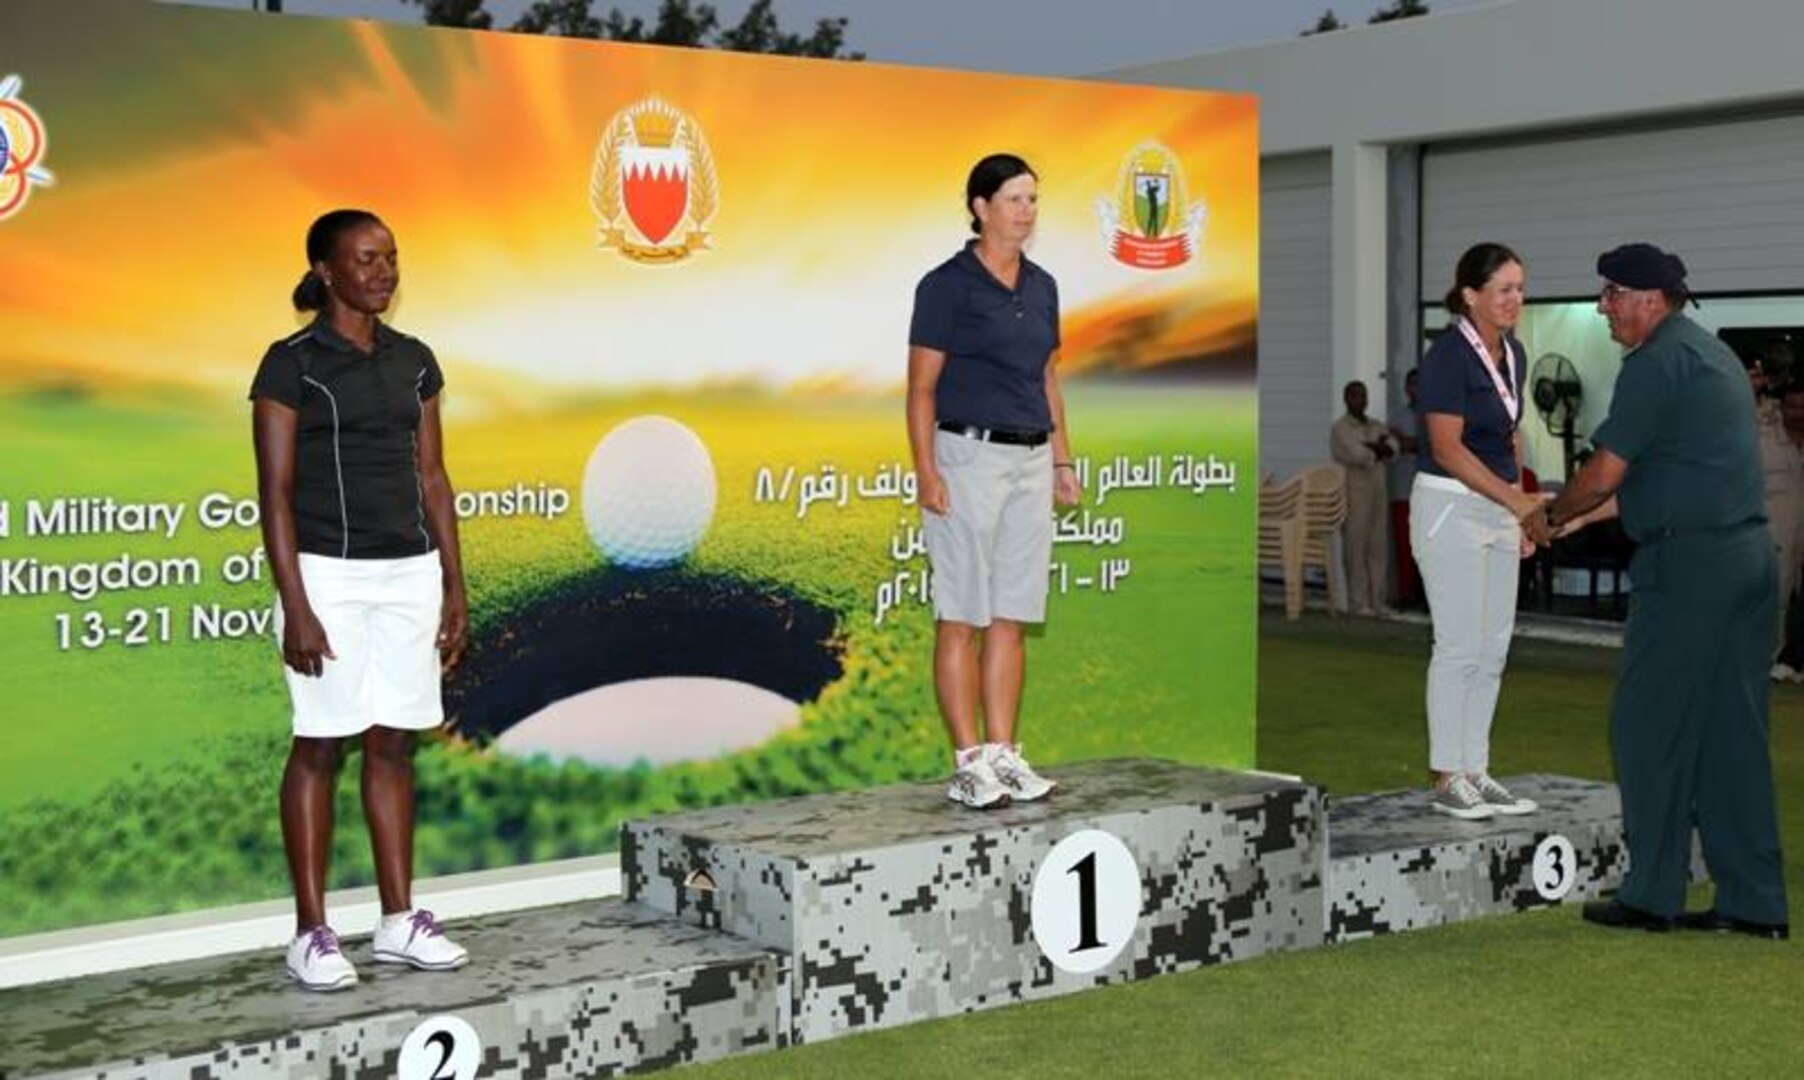 USAF Maj Linda Jeffery (center) and Navy LT Nicole Johnson (recieving her medal) win gold and bronze respectively.  The US Men and Women Armed Forces Golf teams won respective gold medals for the seventh time during the 8th CISM World Military Golf Championship held in Bahrain 13-21 November 2014.